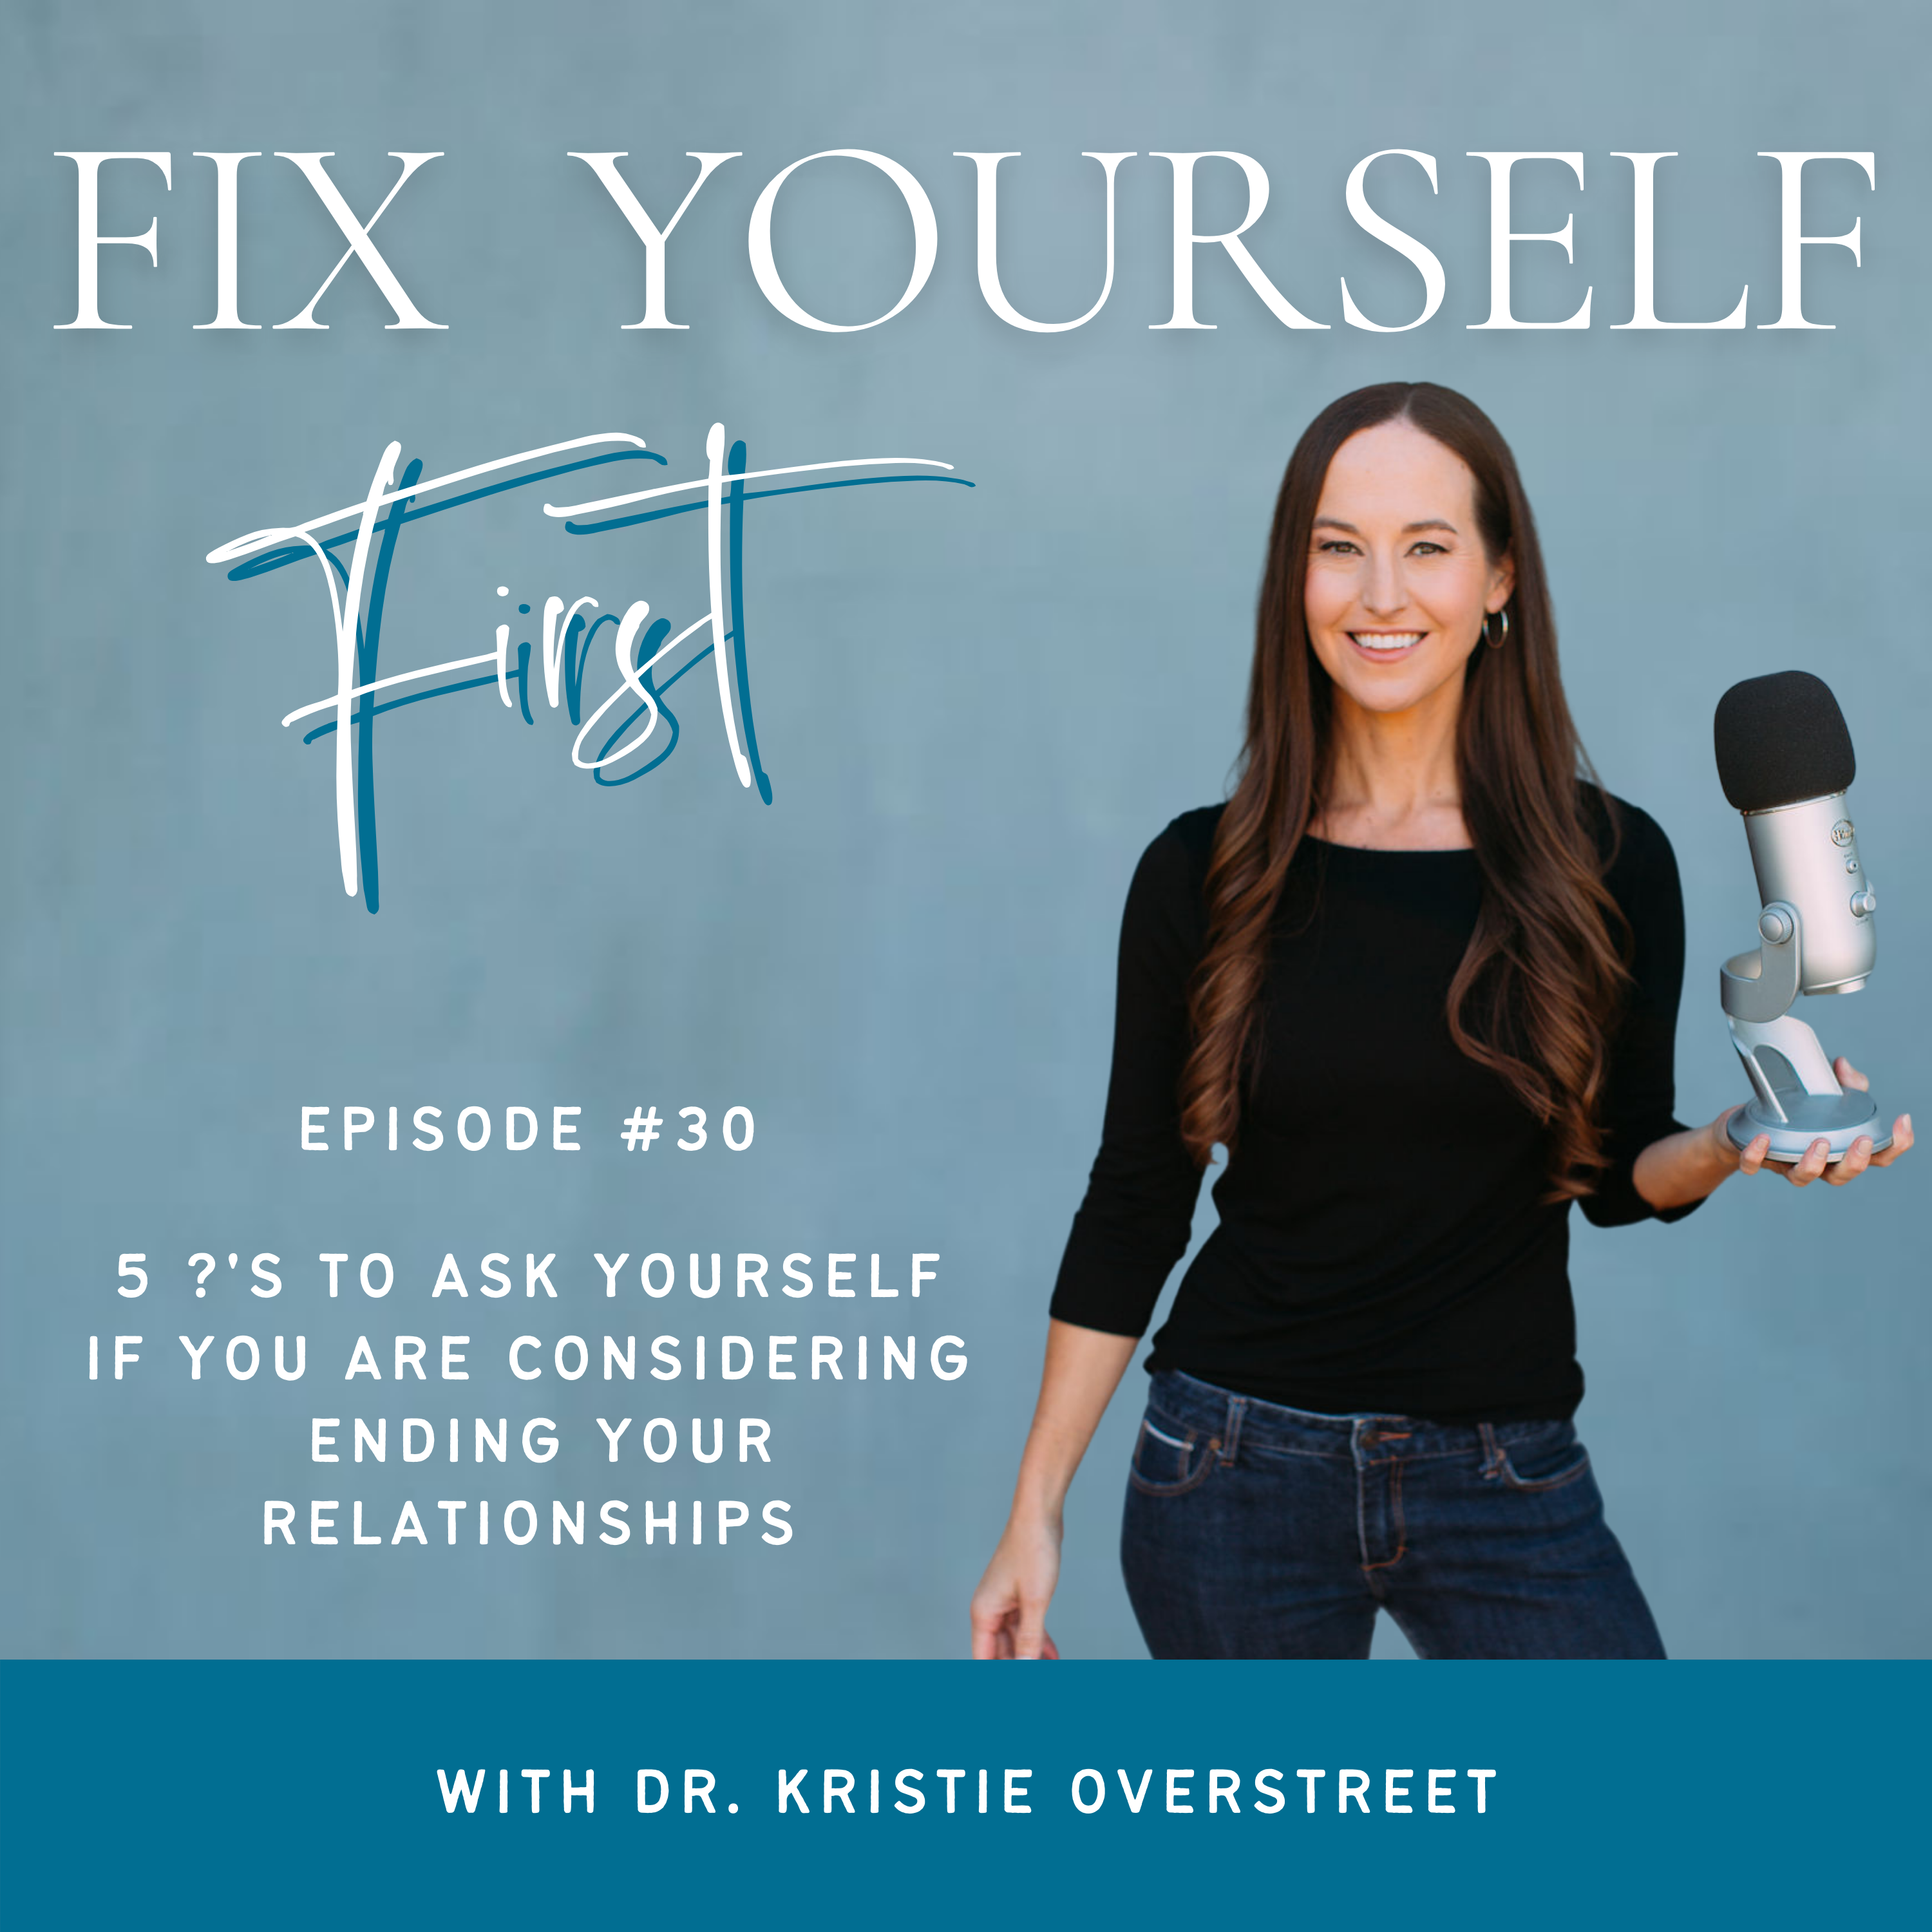 Fix Yourself First - Episode 30